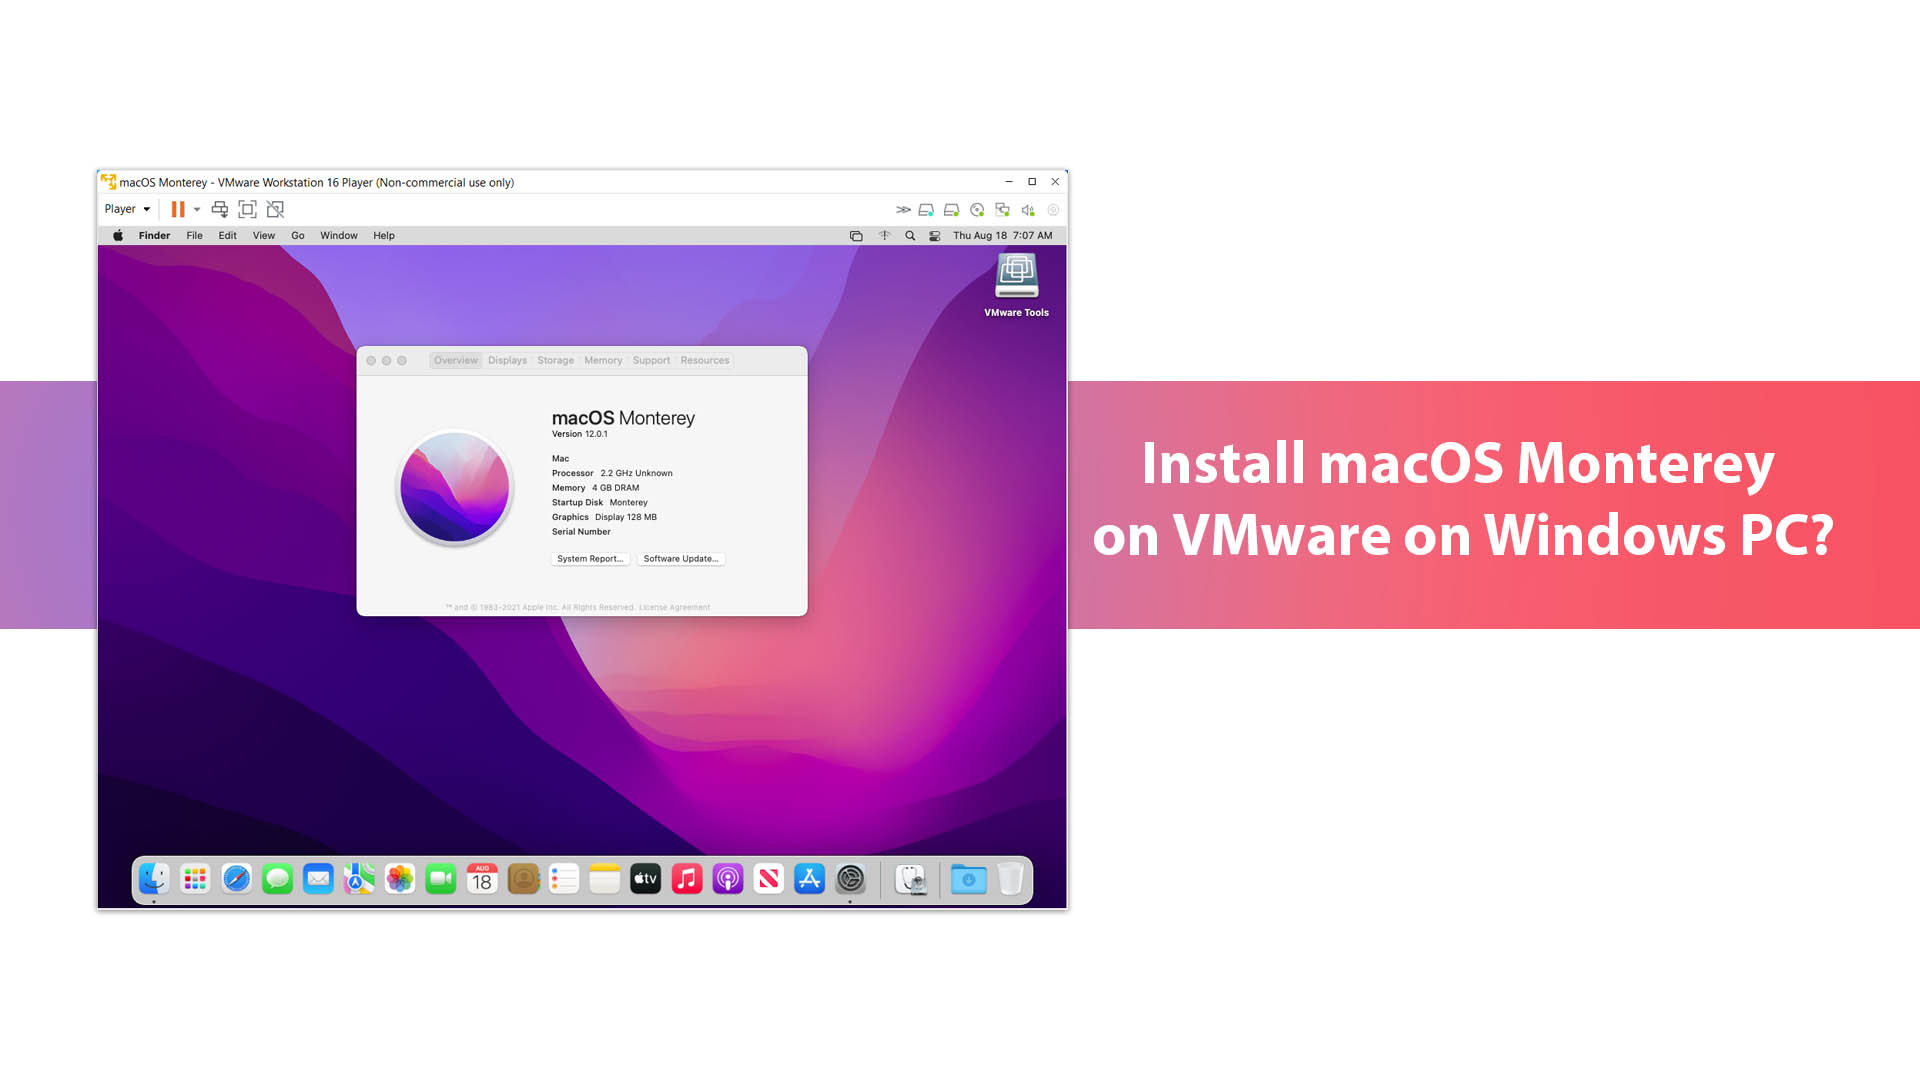 How to Install macOS Monterey on VMware on Windows PC